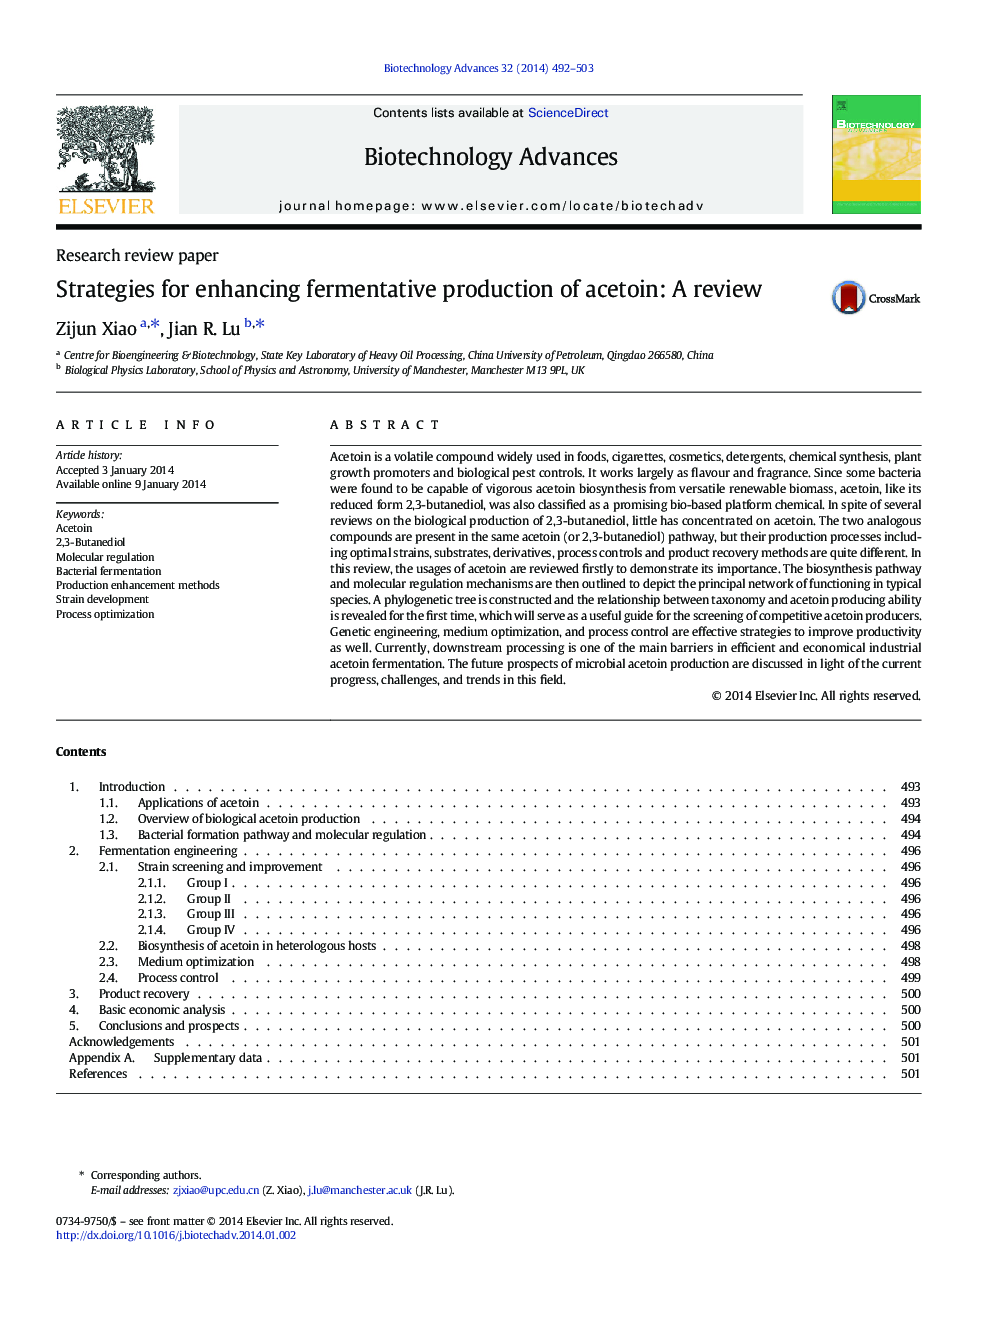 Strategies for enhancing fermentative production of acetoin: A review